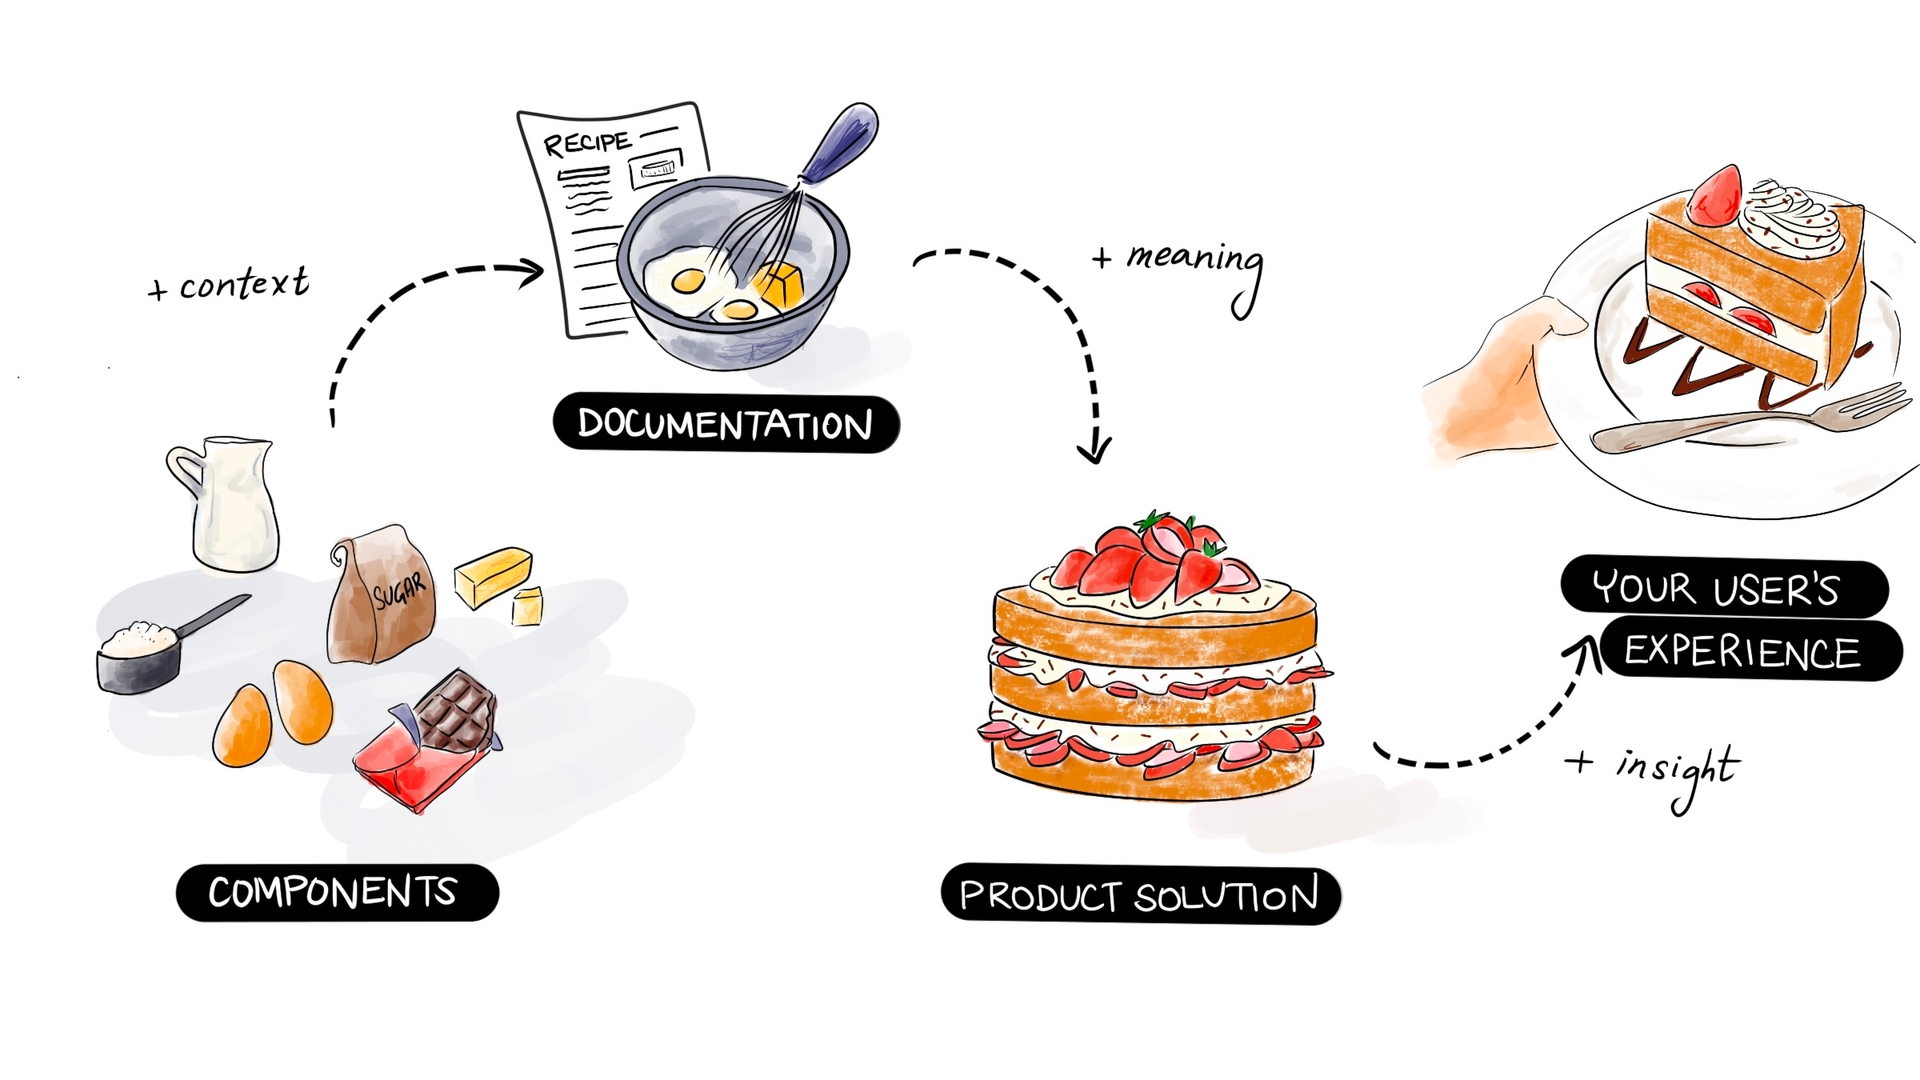 An image comparing baking with design systems from a tweet by Aletheia Délivré